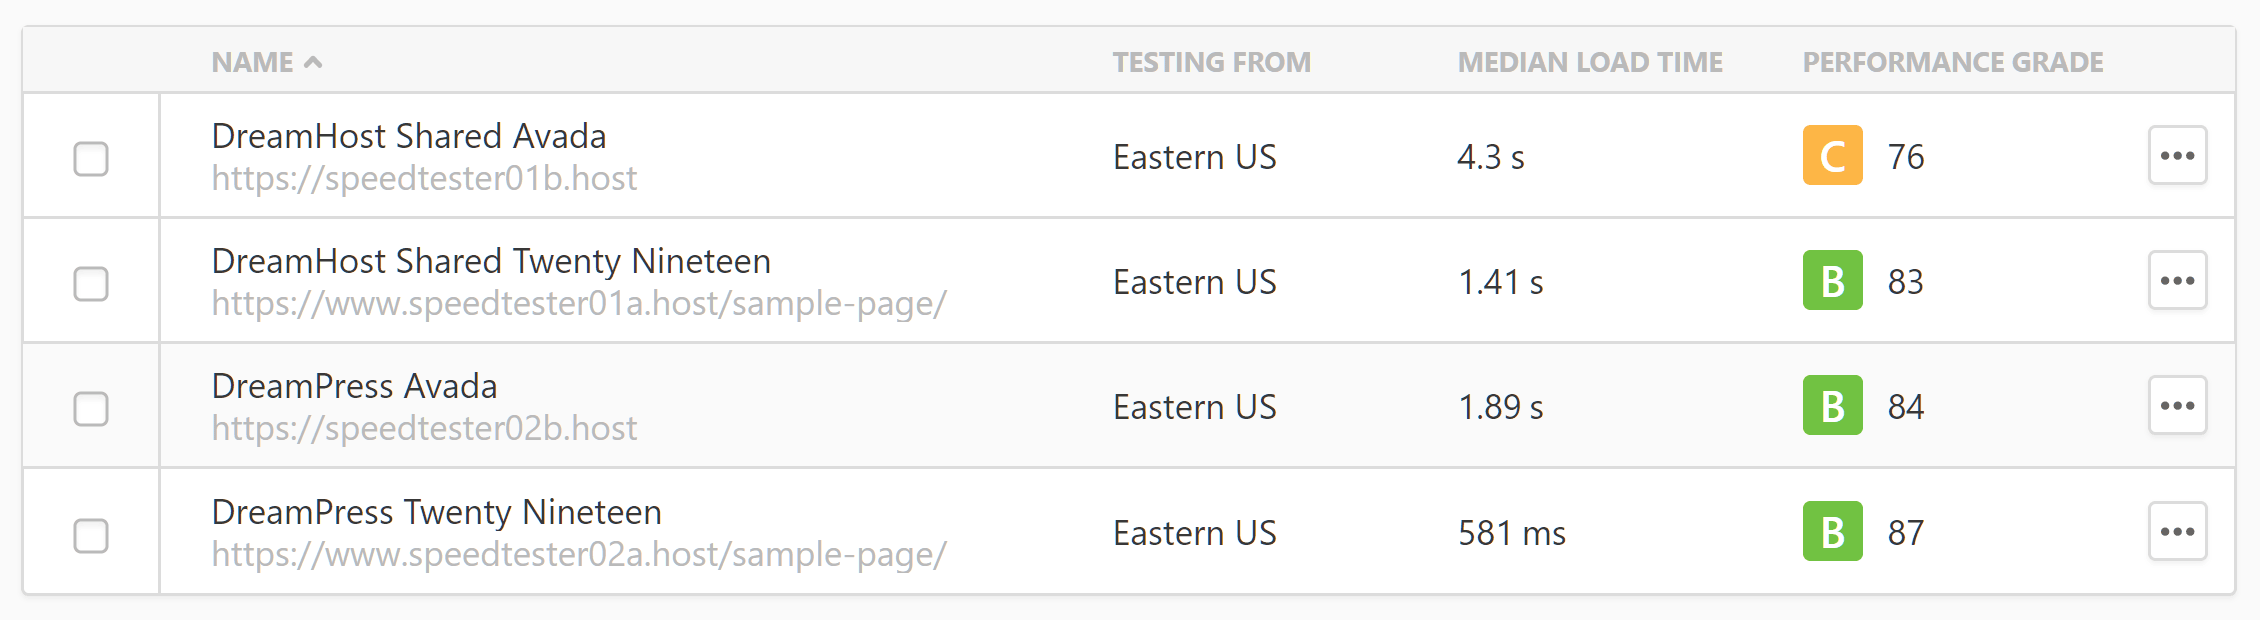 Loading Times of the Sites Hosted by DreamHost